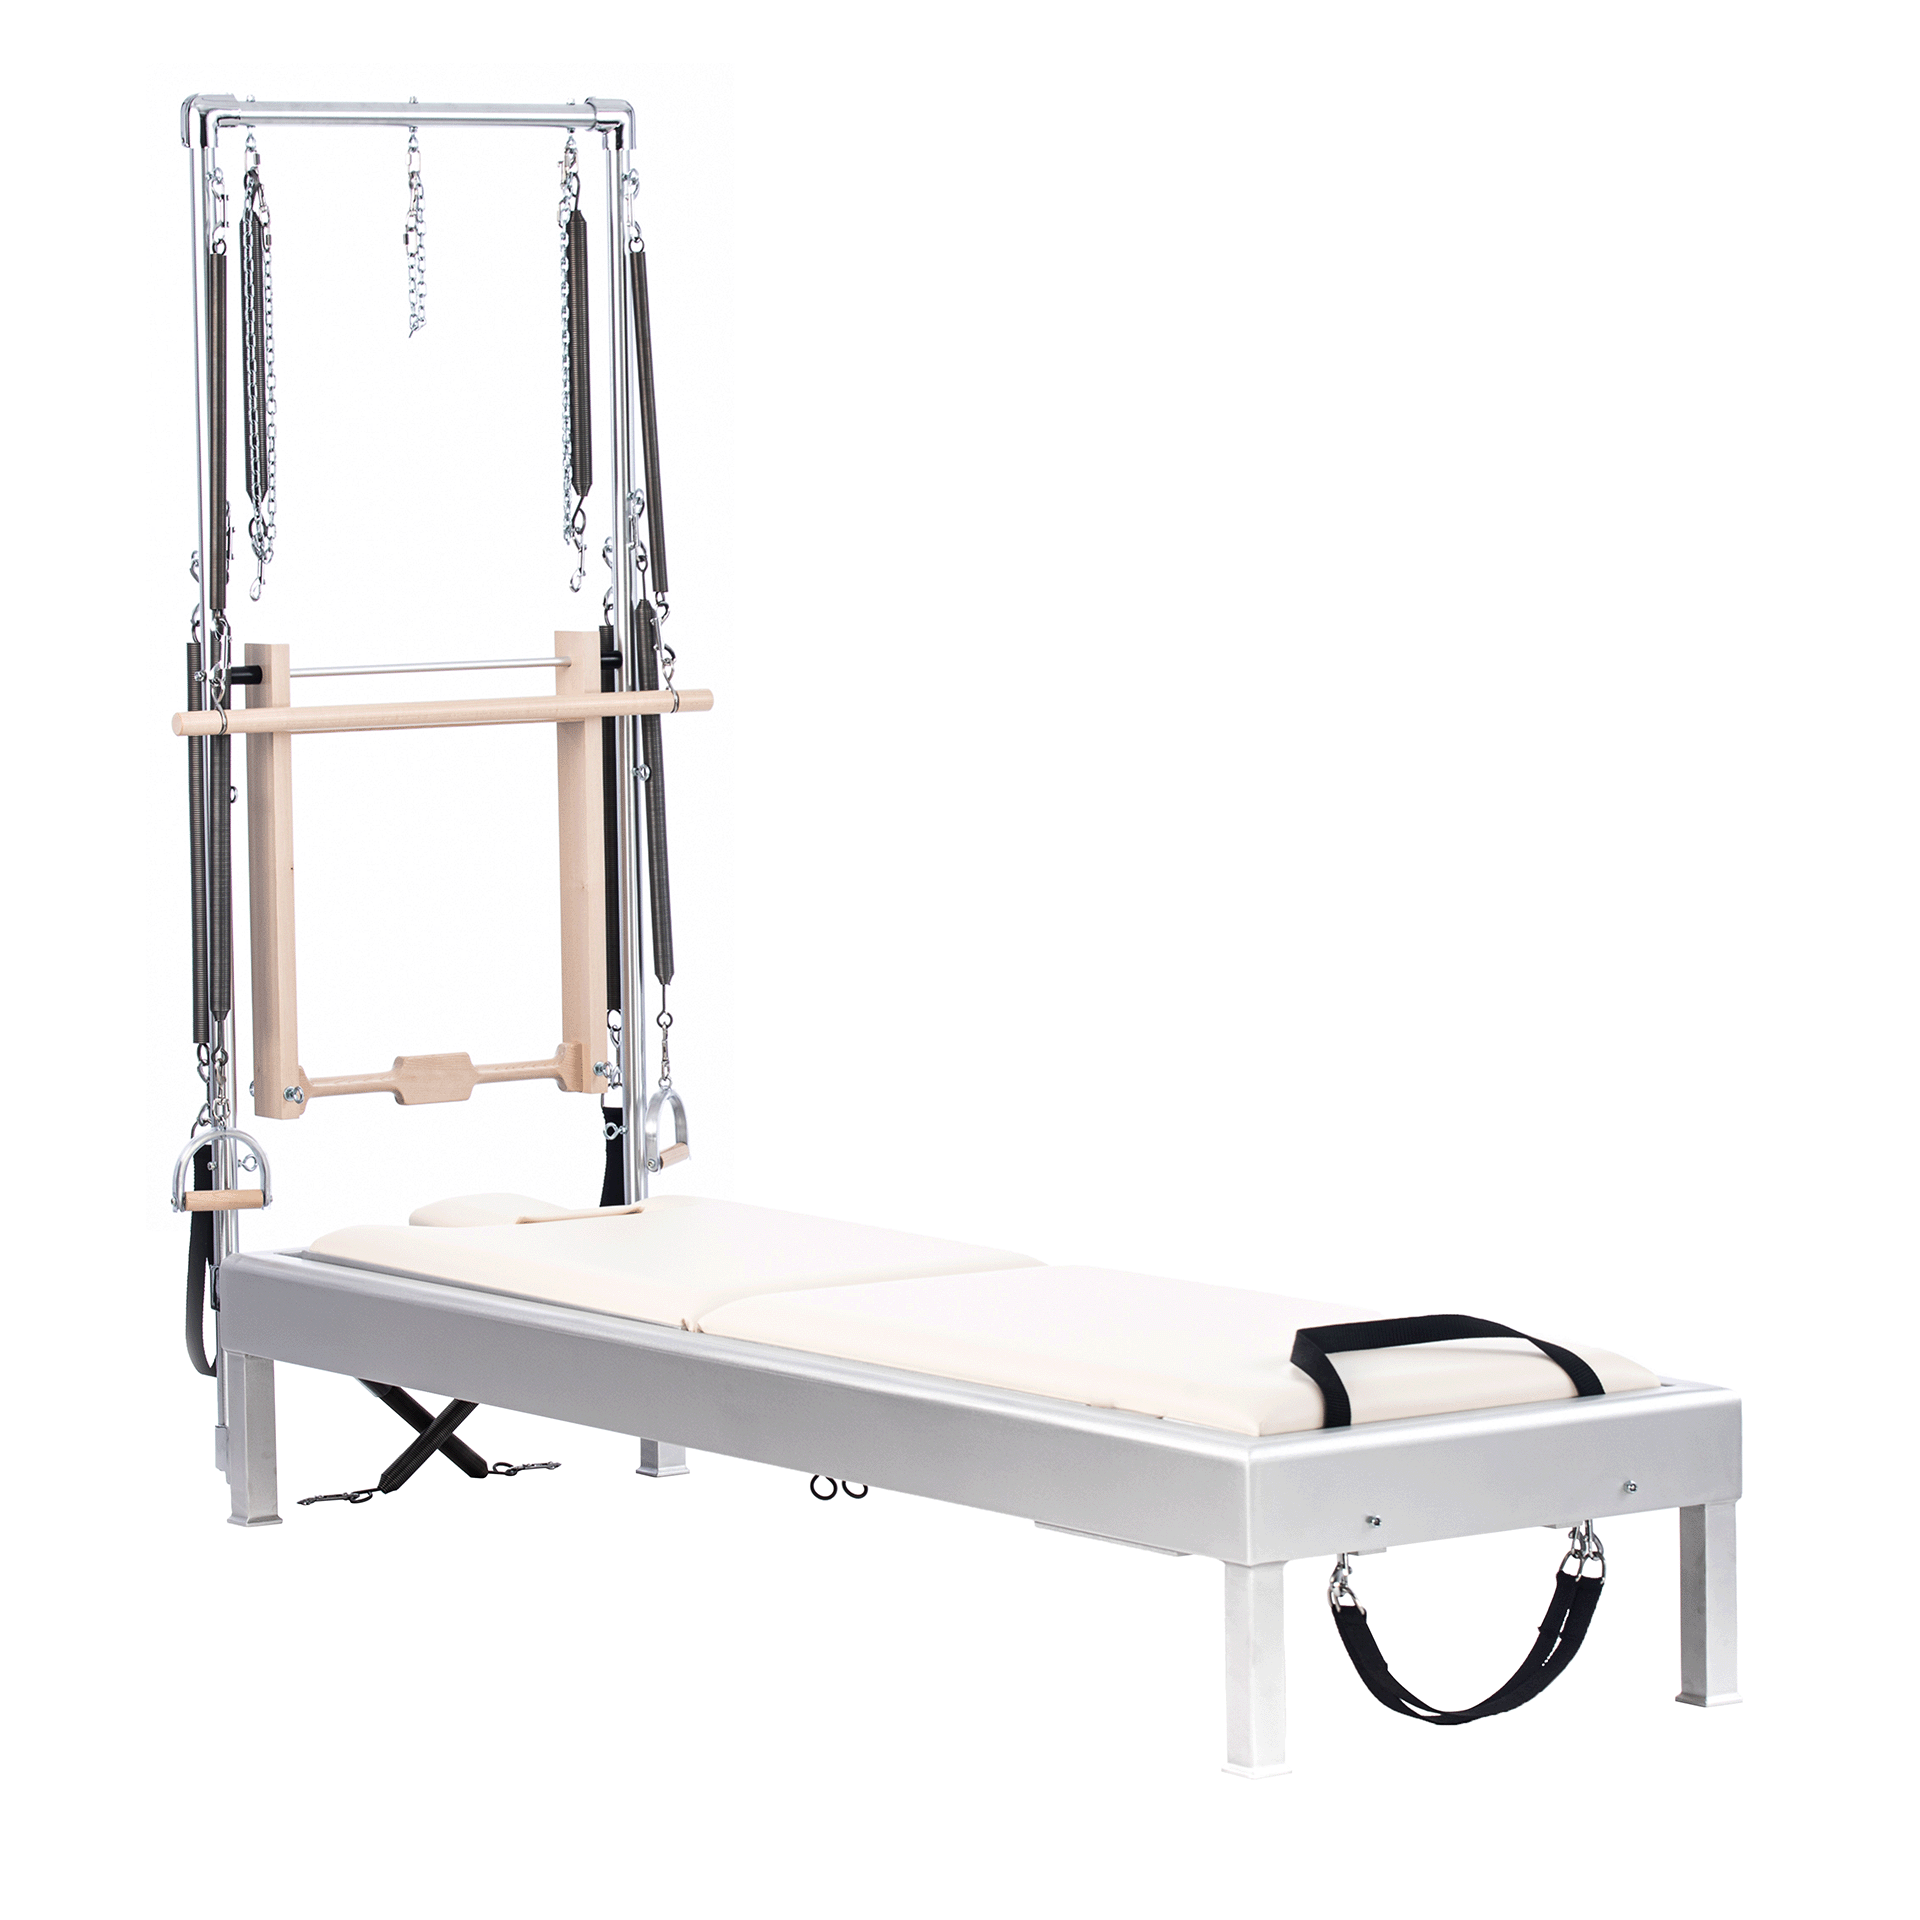 Exquisite Wood Studio Quality Legacy Pilates Reformer with